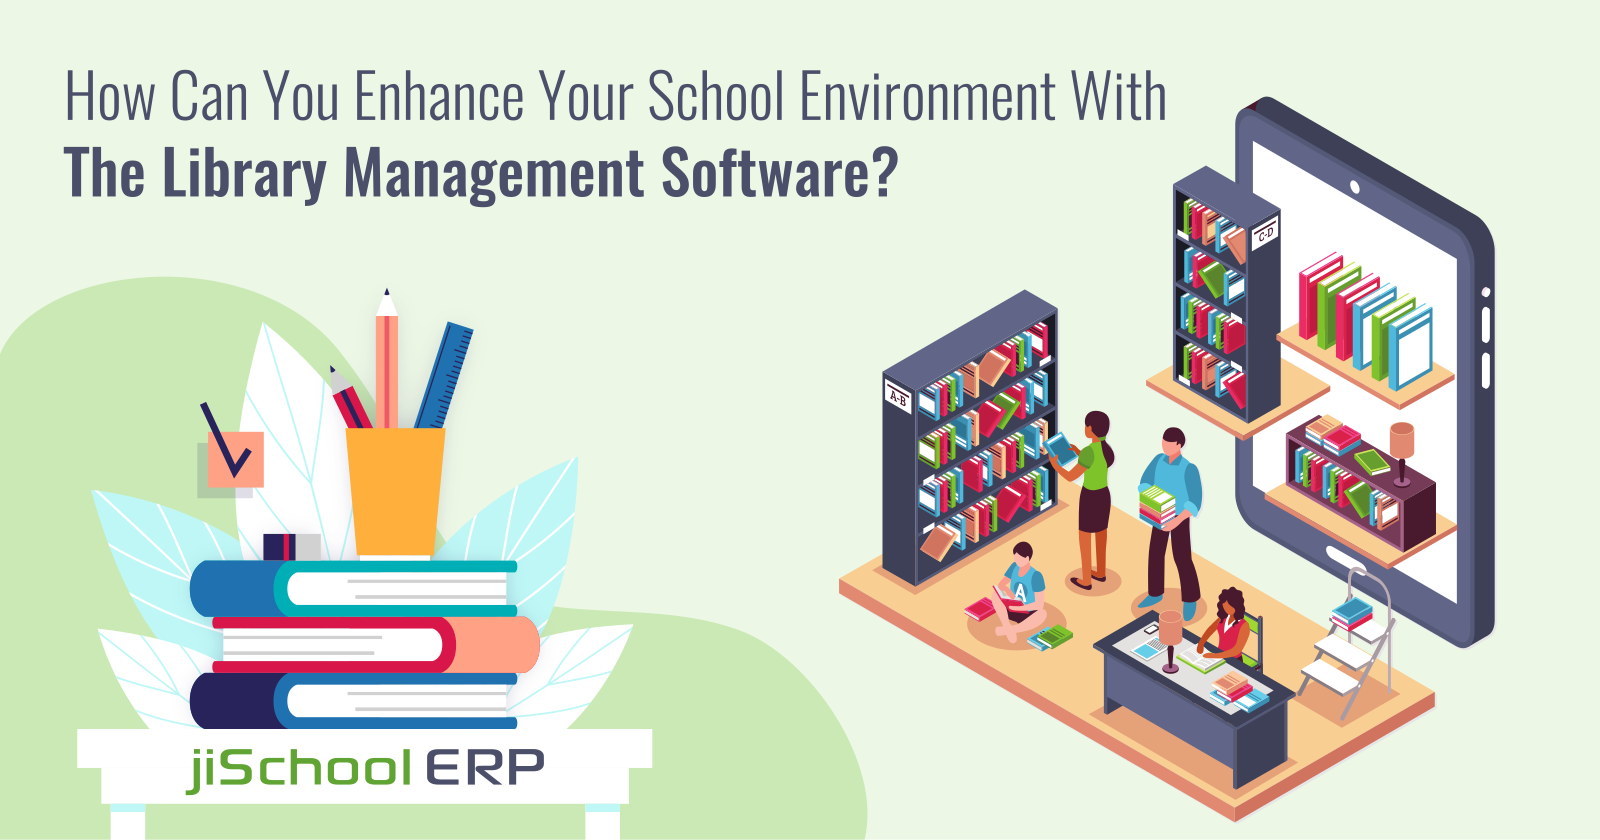 How Can You Enhance Your School Environment With The Library Management Software?